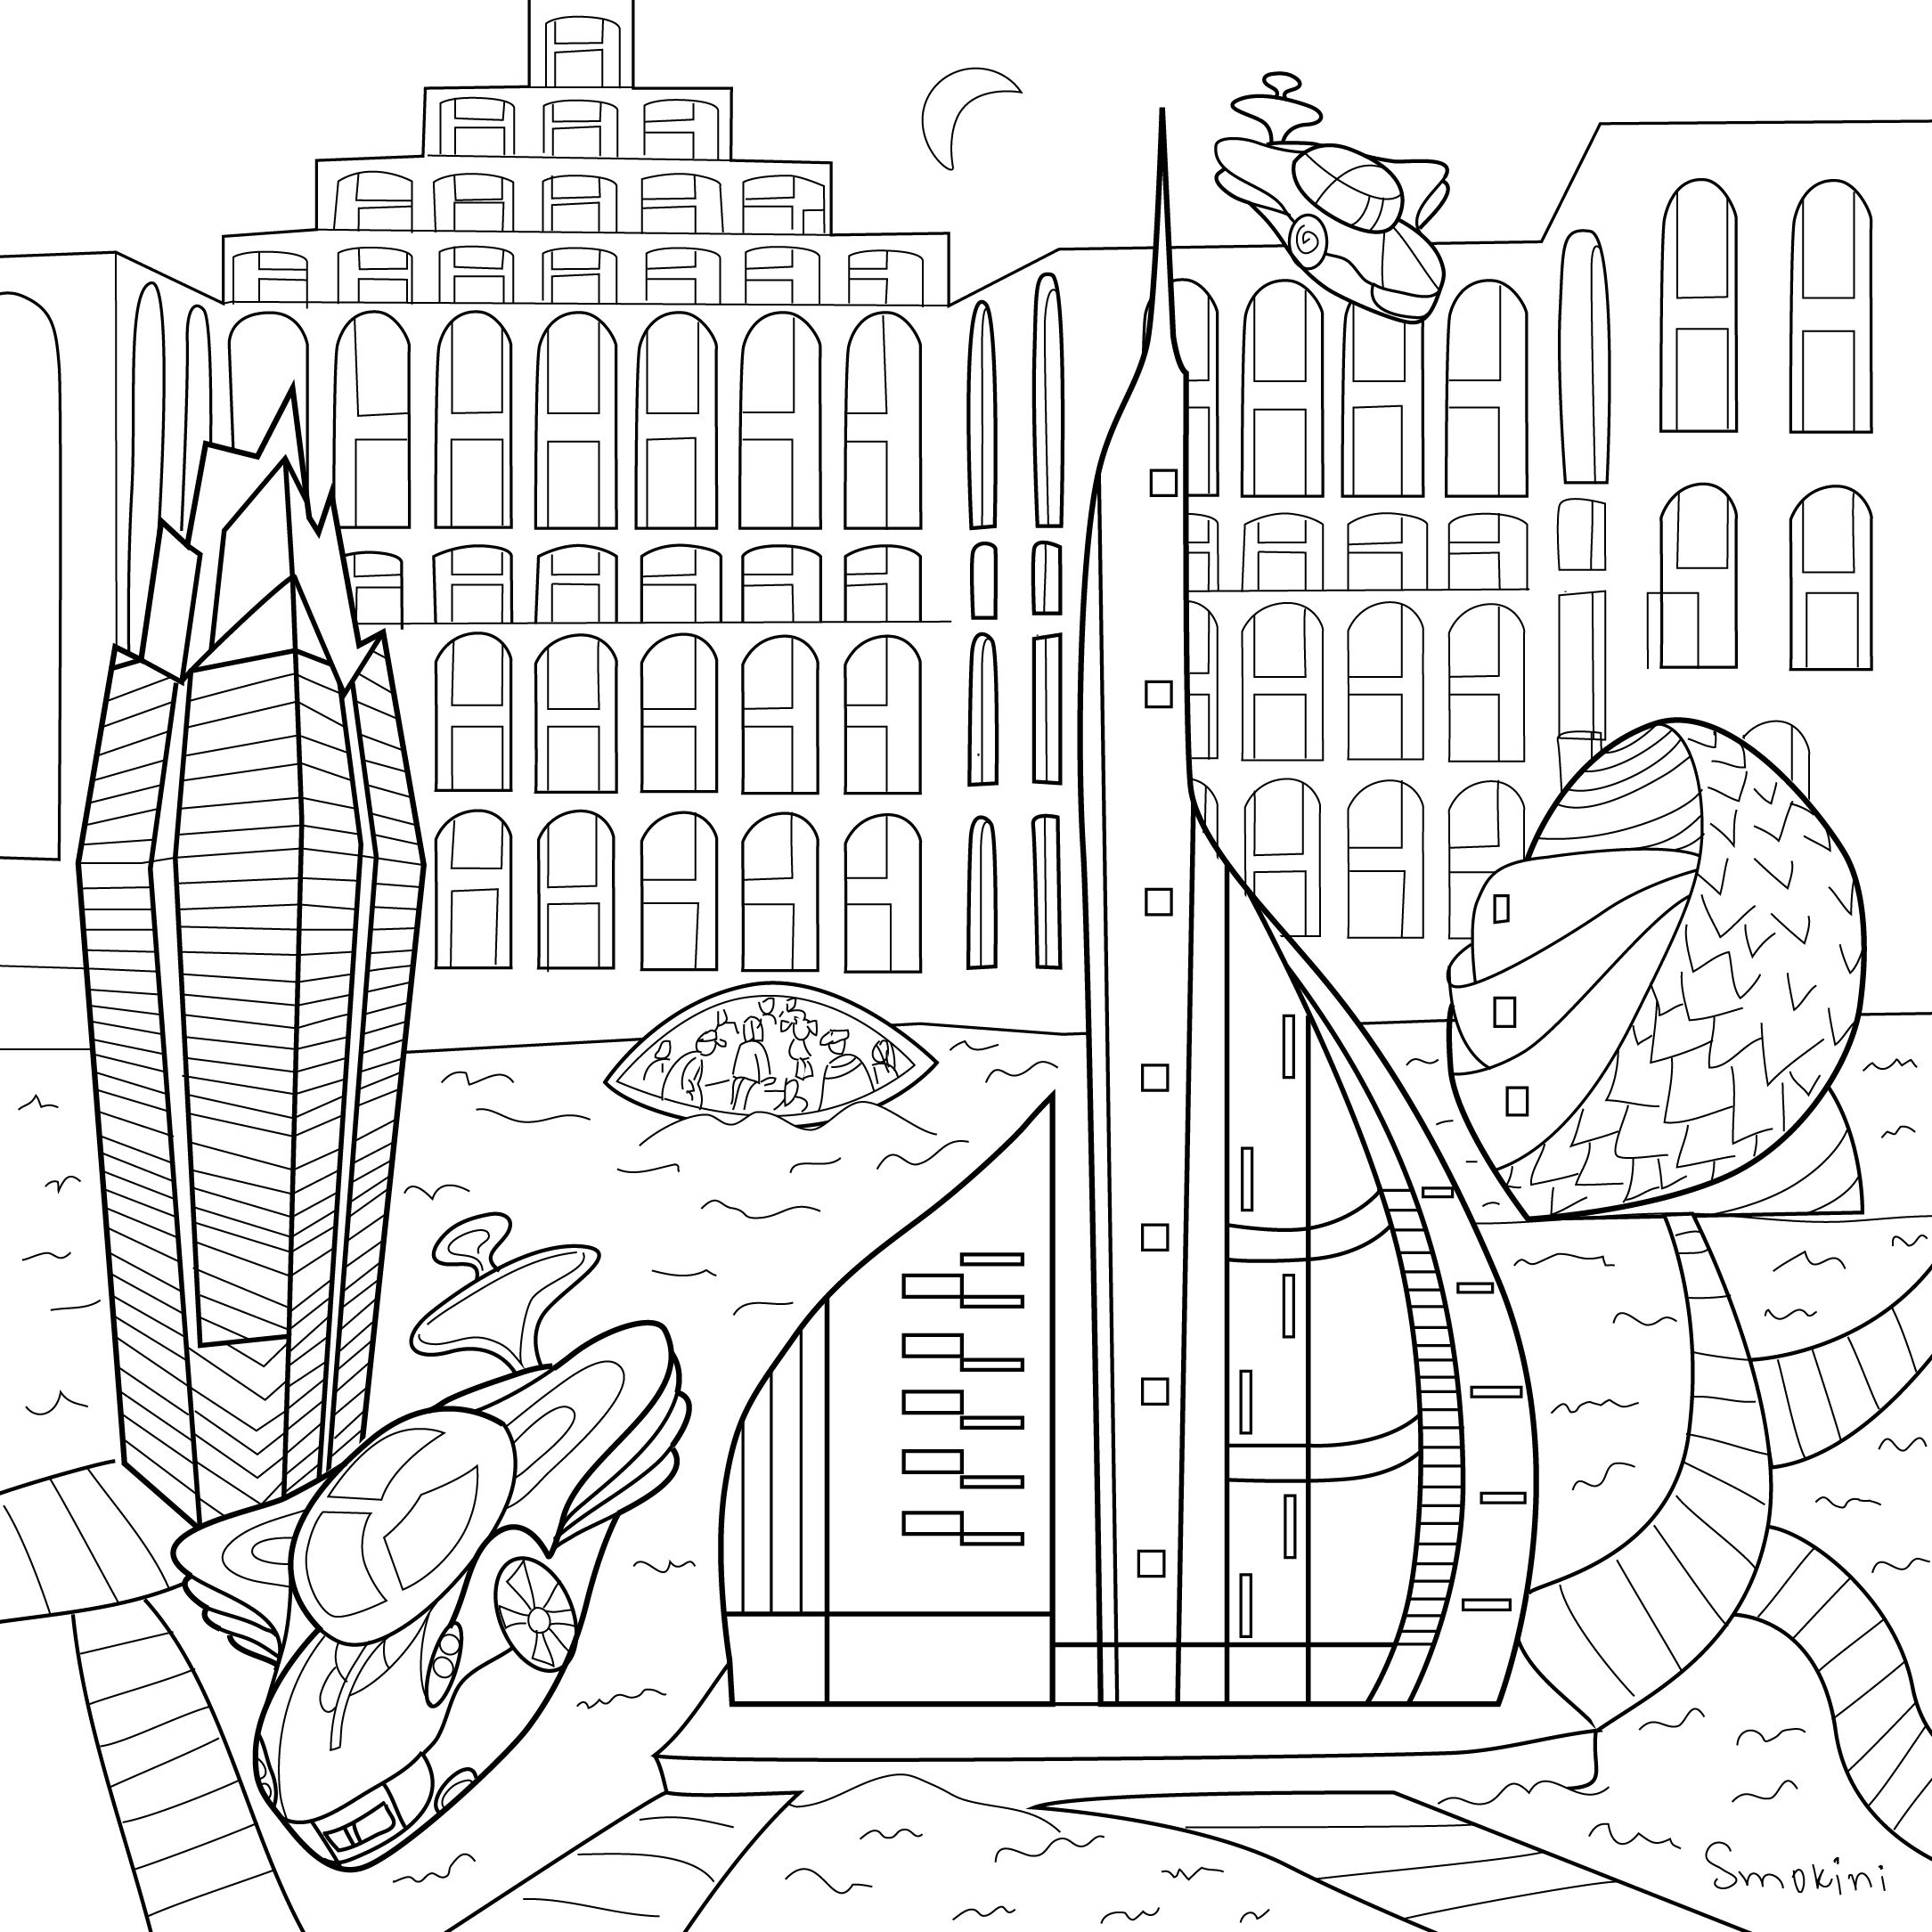 Town from the Future by Smokini (Urban Stories Coloring Book)